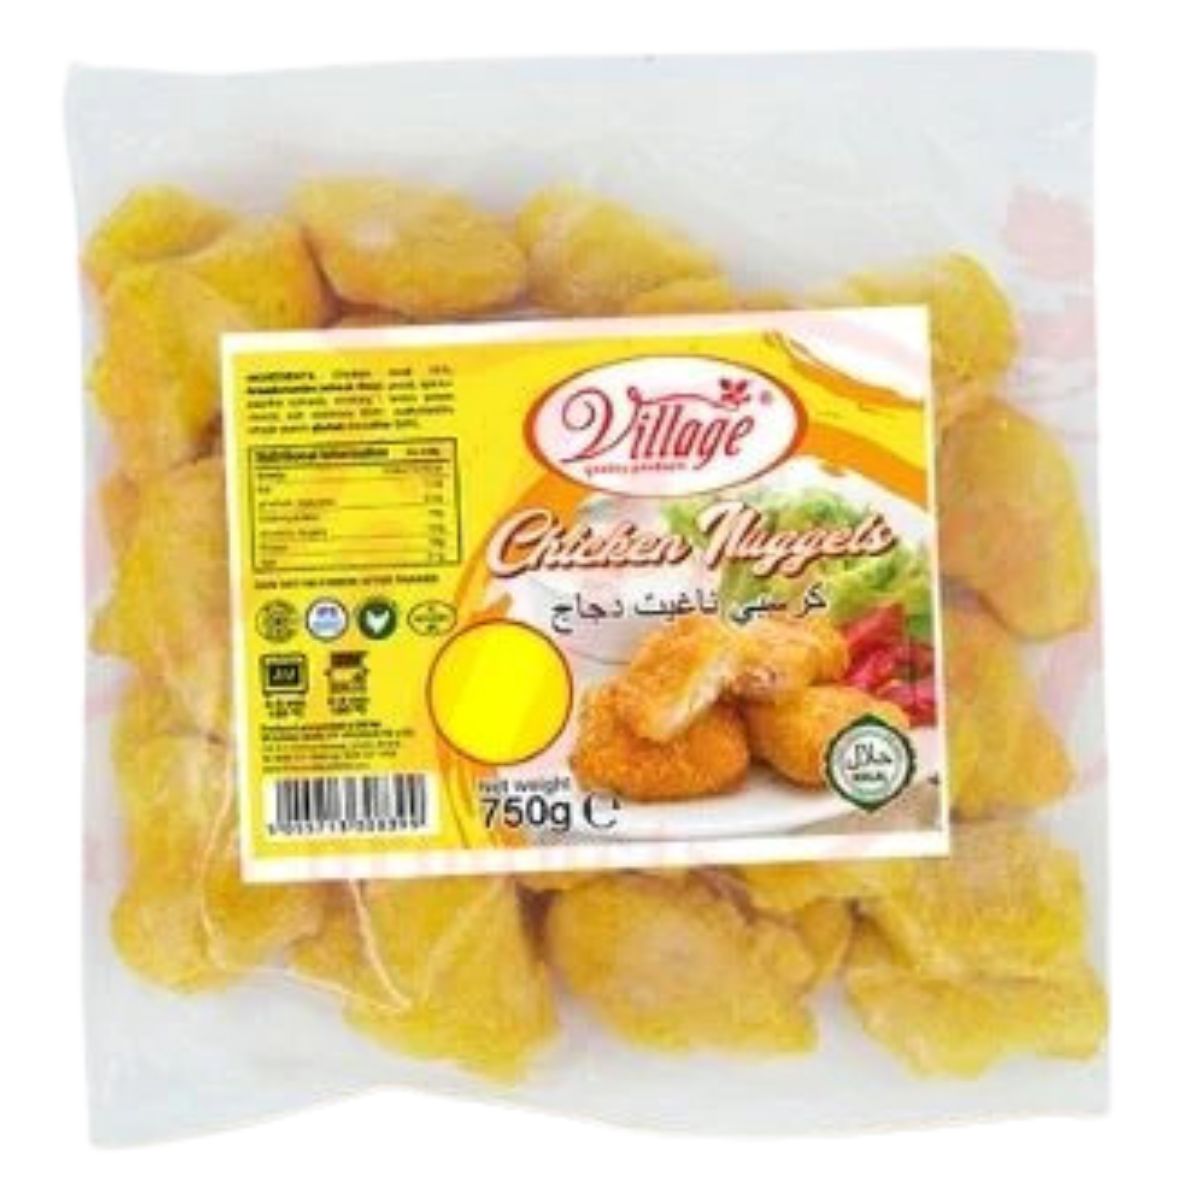 A bag of Village - Halal Chicken Nuggets - 750g on a white background.